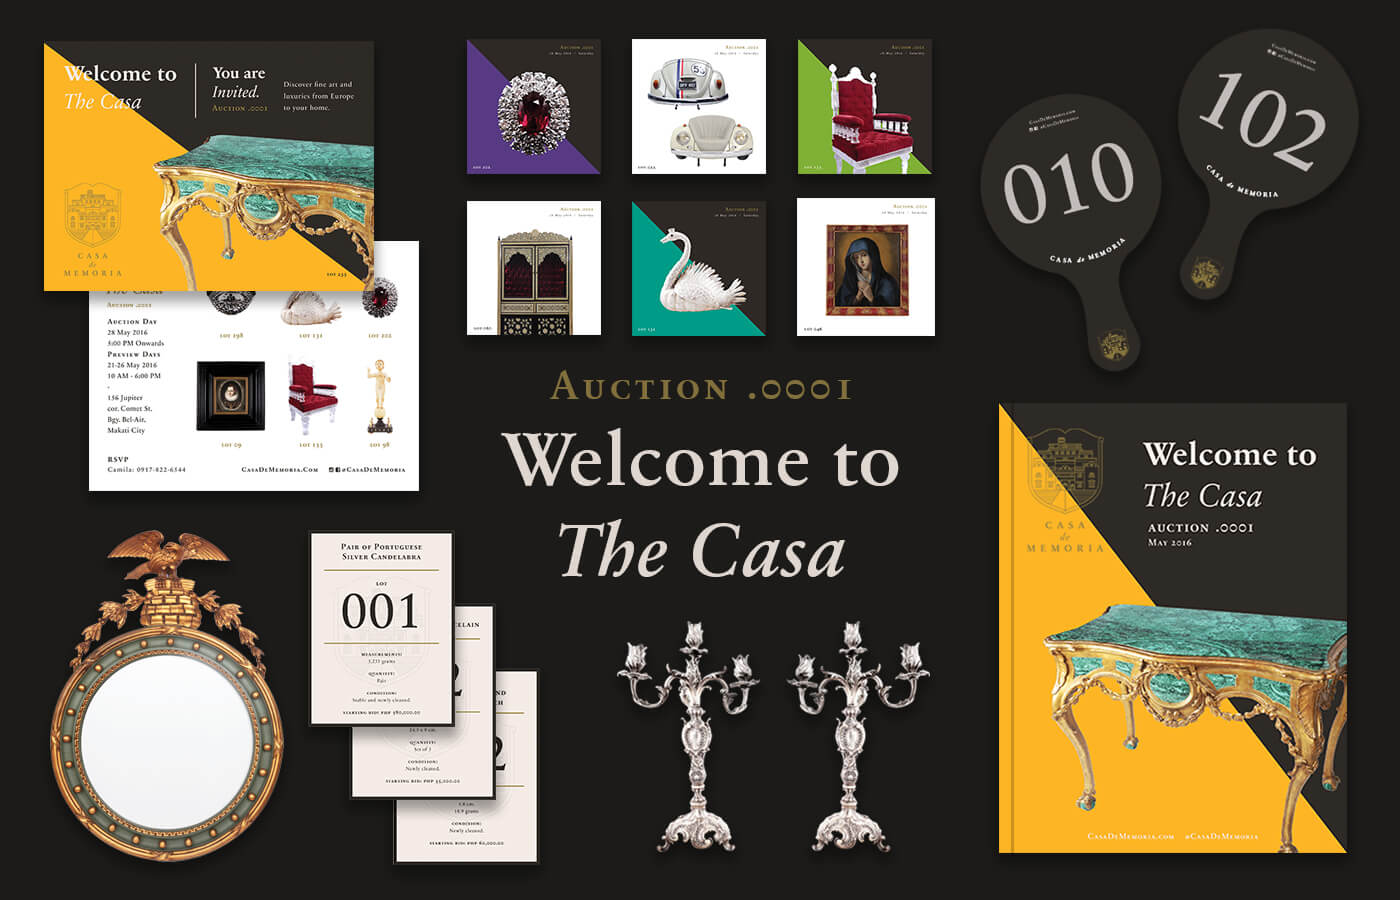 Campaign branding and collaterals designed for Welcome to the Casa Auction for Casa de Memoria